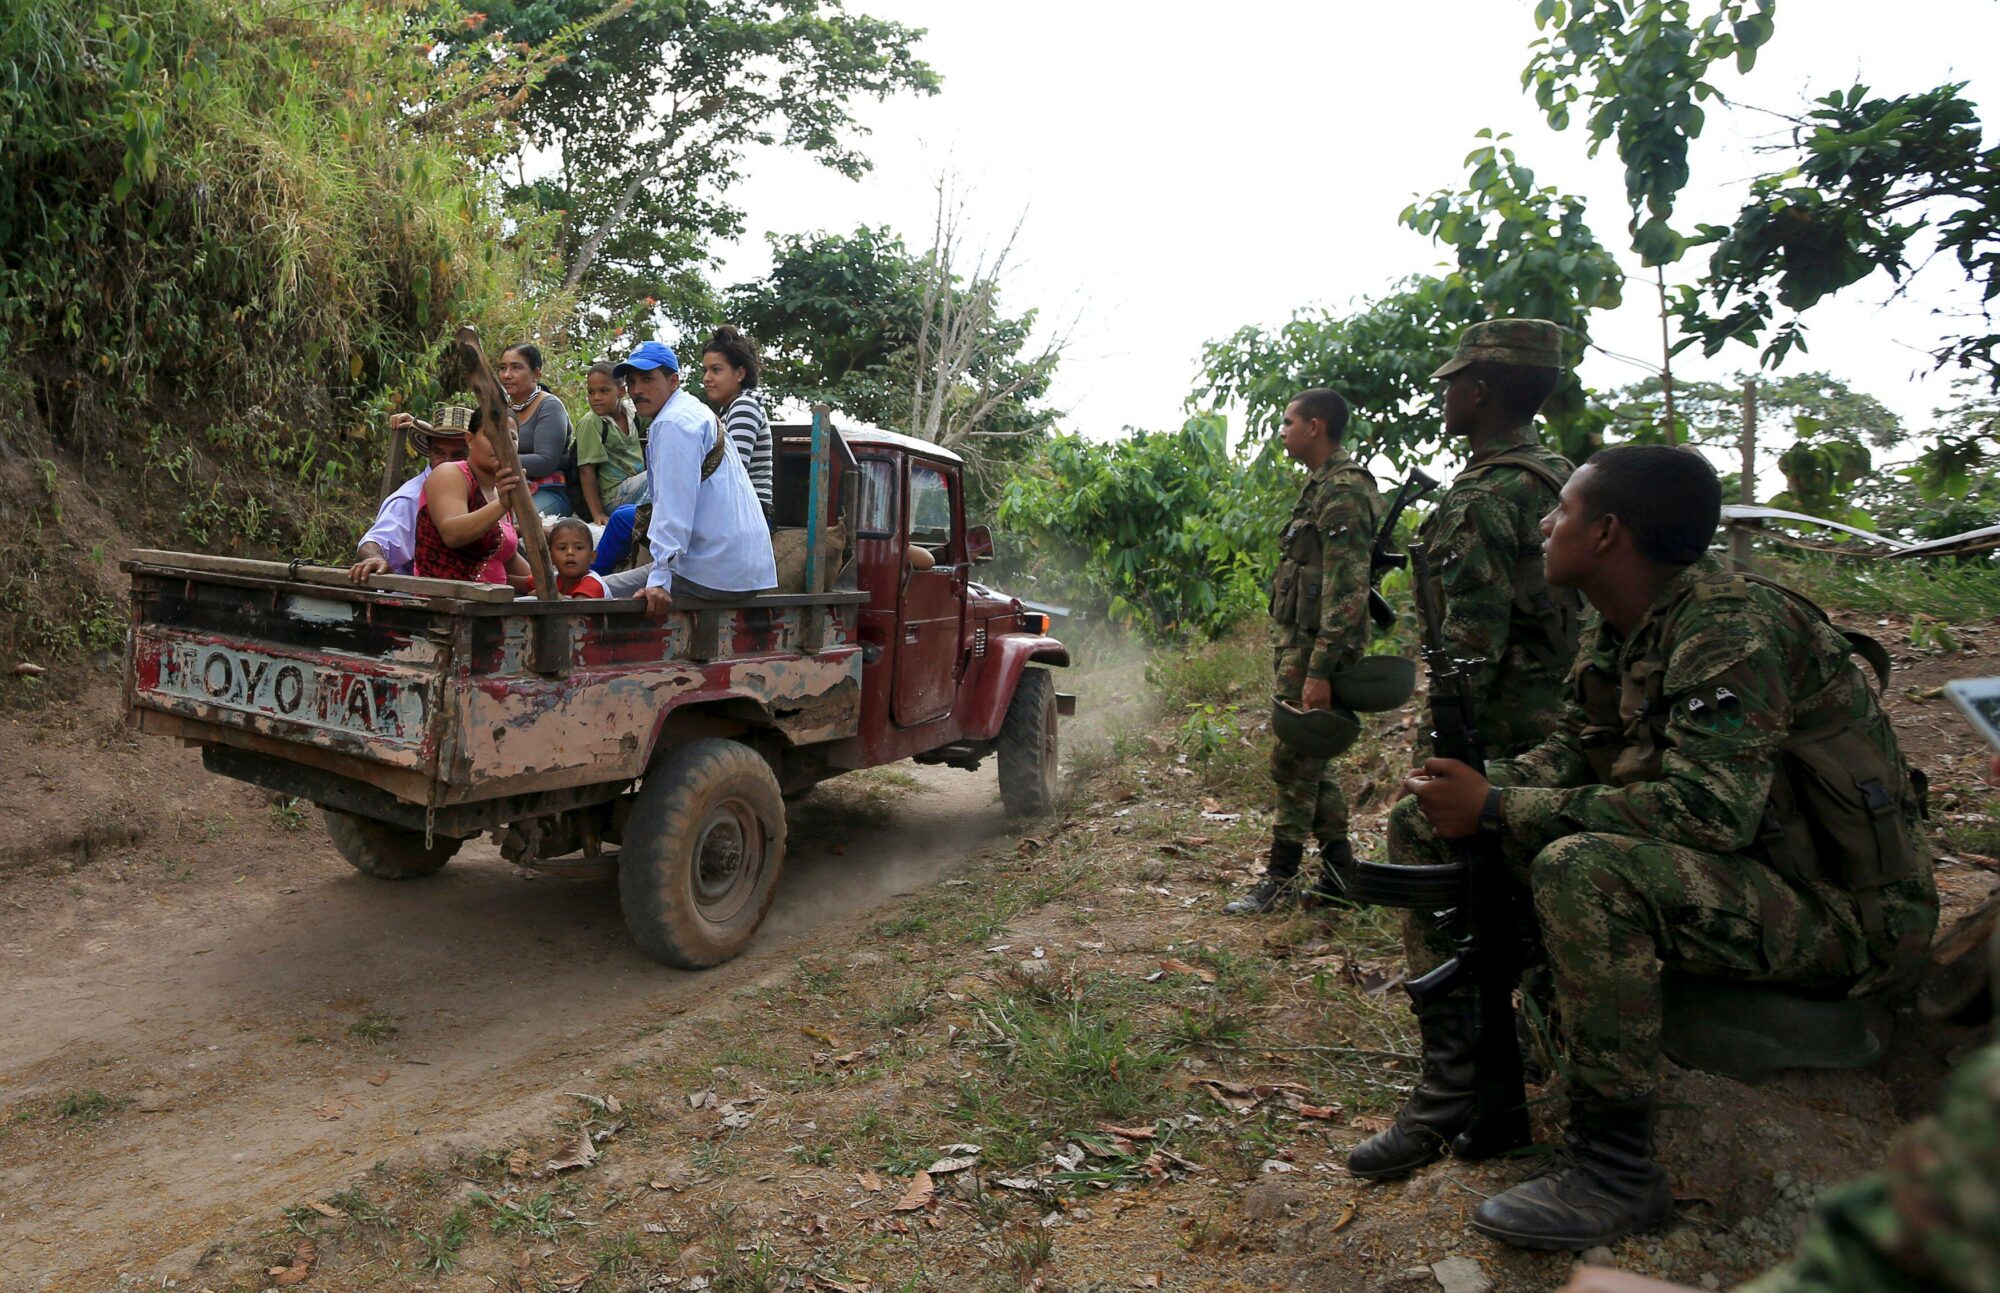 <p>Colombian soldiers stand guard as families displaced by violence return to coffee plantations in Cesar department, many of which were abandoned in 2002 during conflict between the government and FARC rebels. Research has sought to explore the links between control and use of natural resources and armed conflict in country. (Image: José Gomez / Alamy)</p>